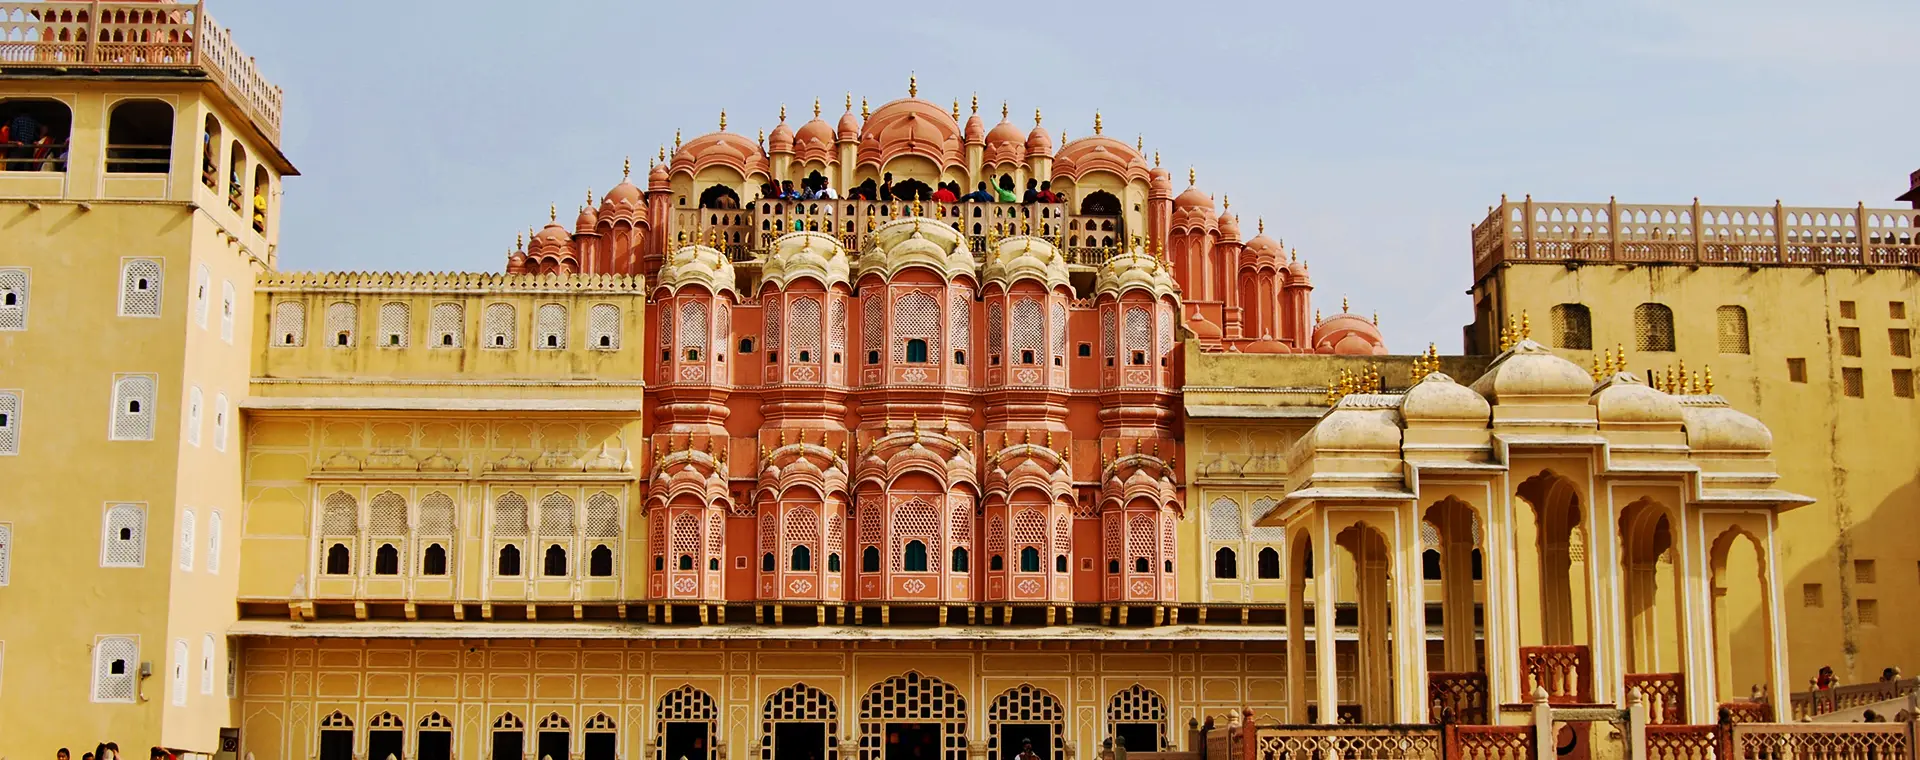 8 Religious Places In Rajasthan For A Spiritual Journey